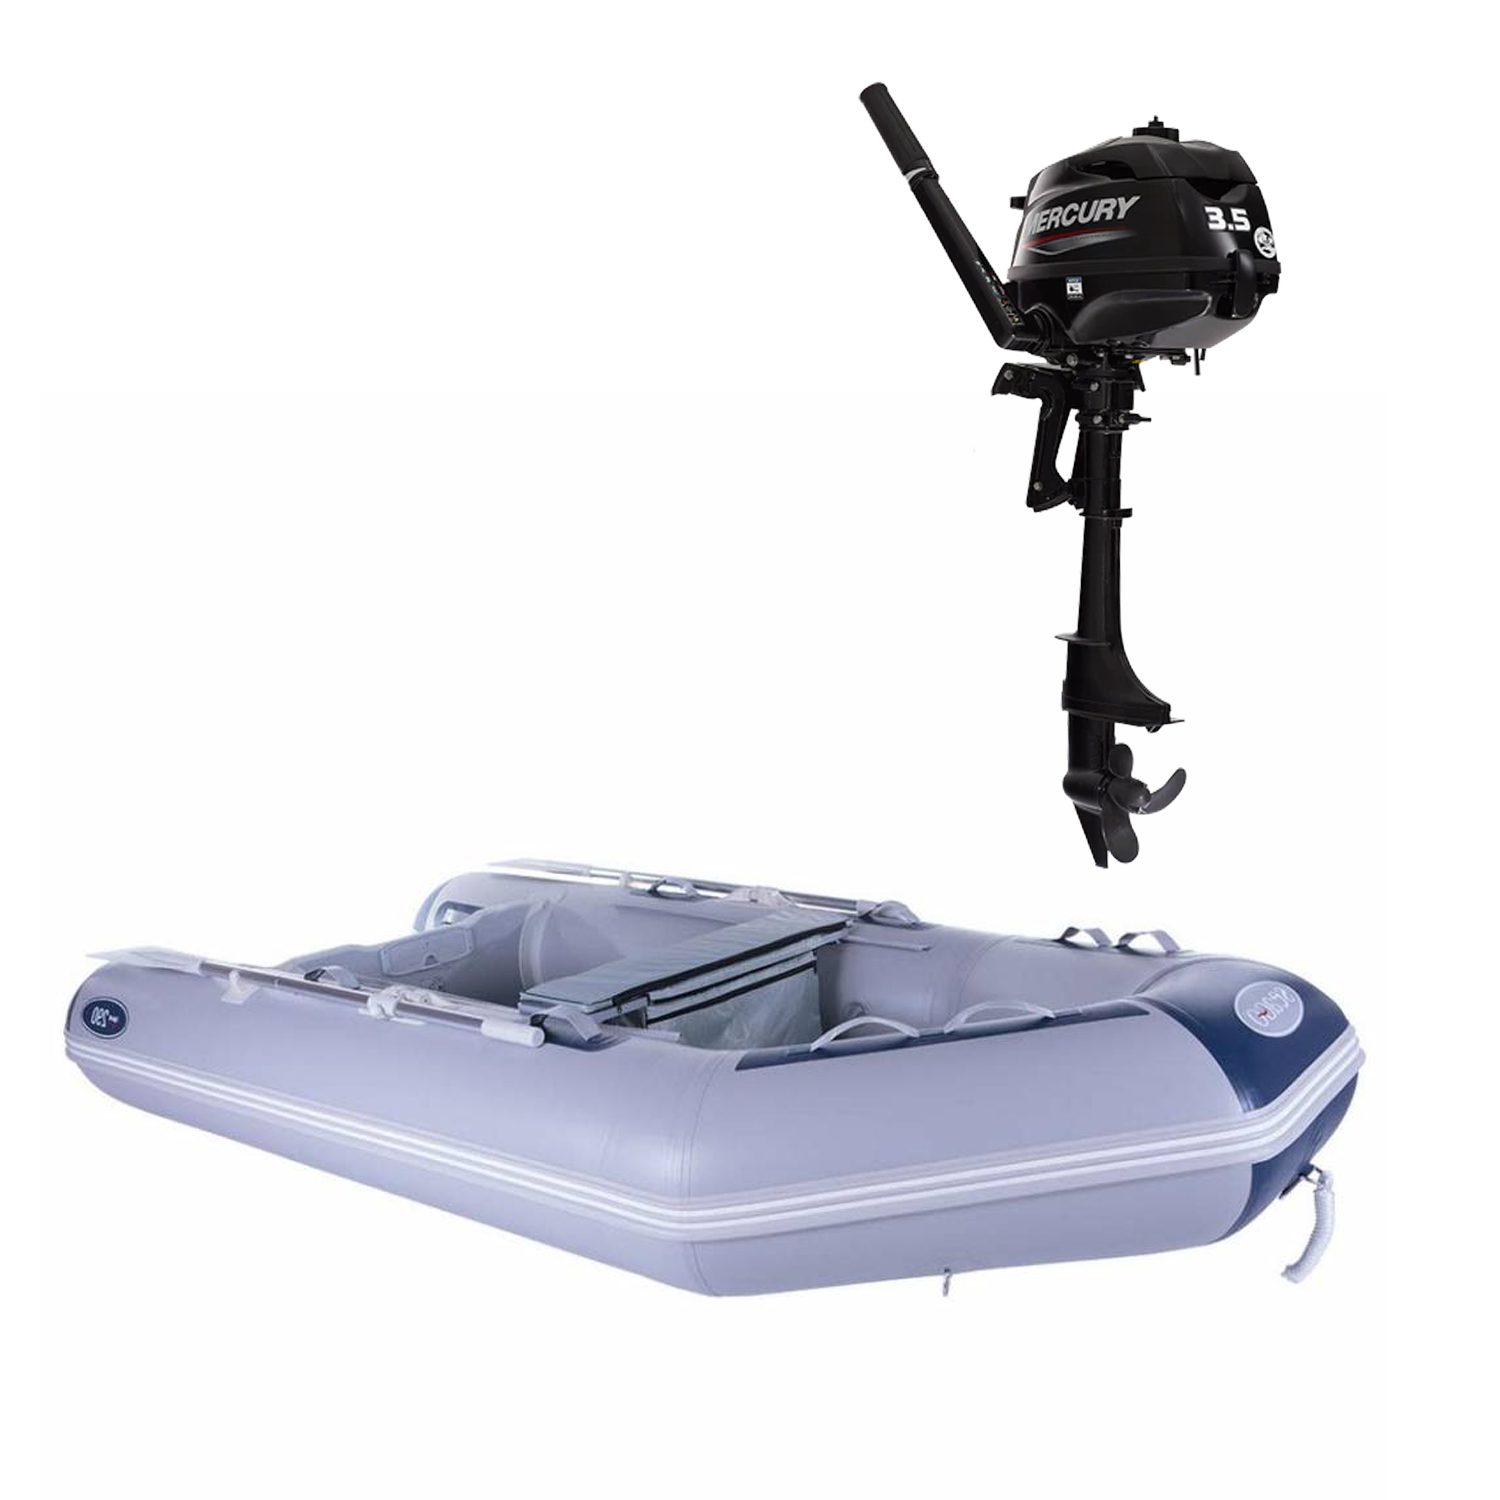 Seago Spirit Inflatable Boat & Mercury 3.5HP Outboard Engine